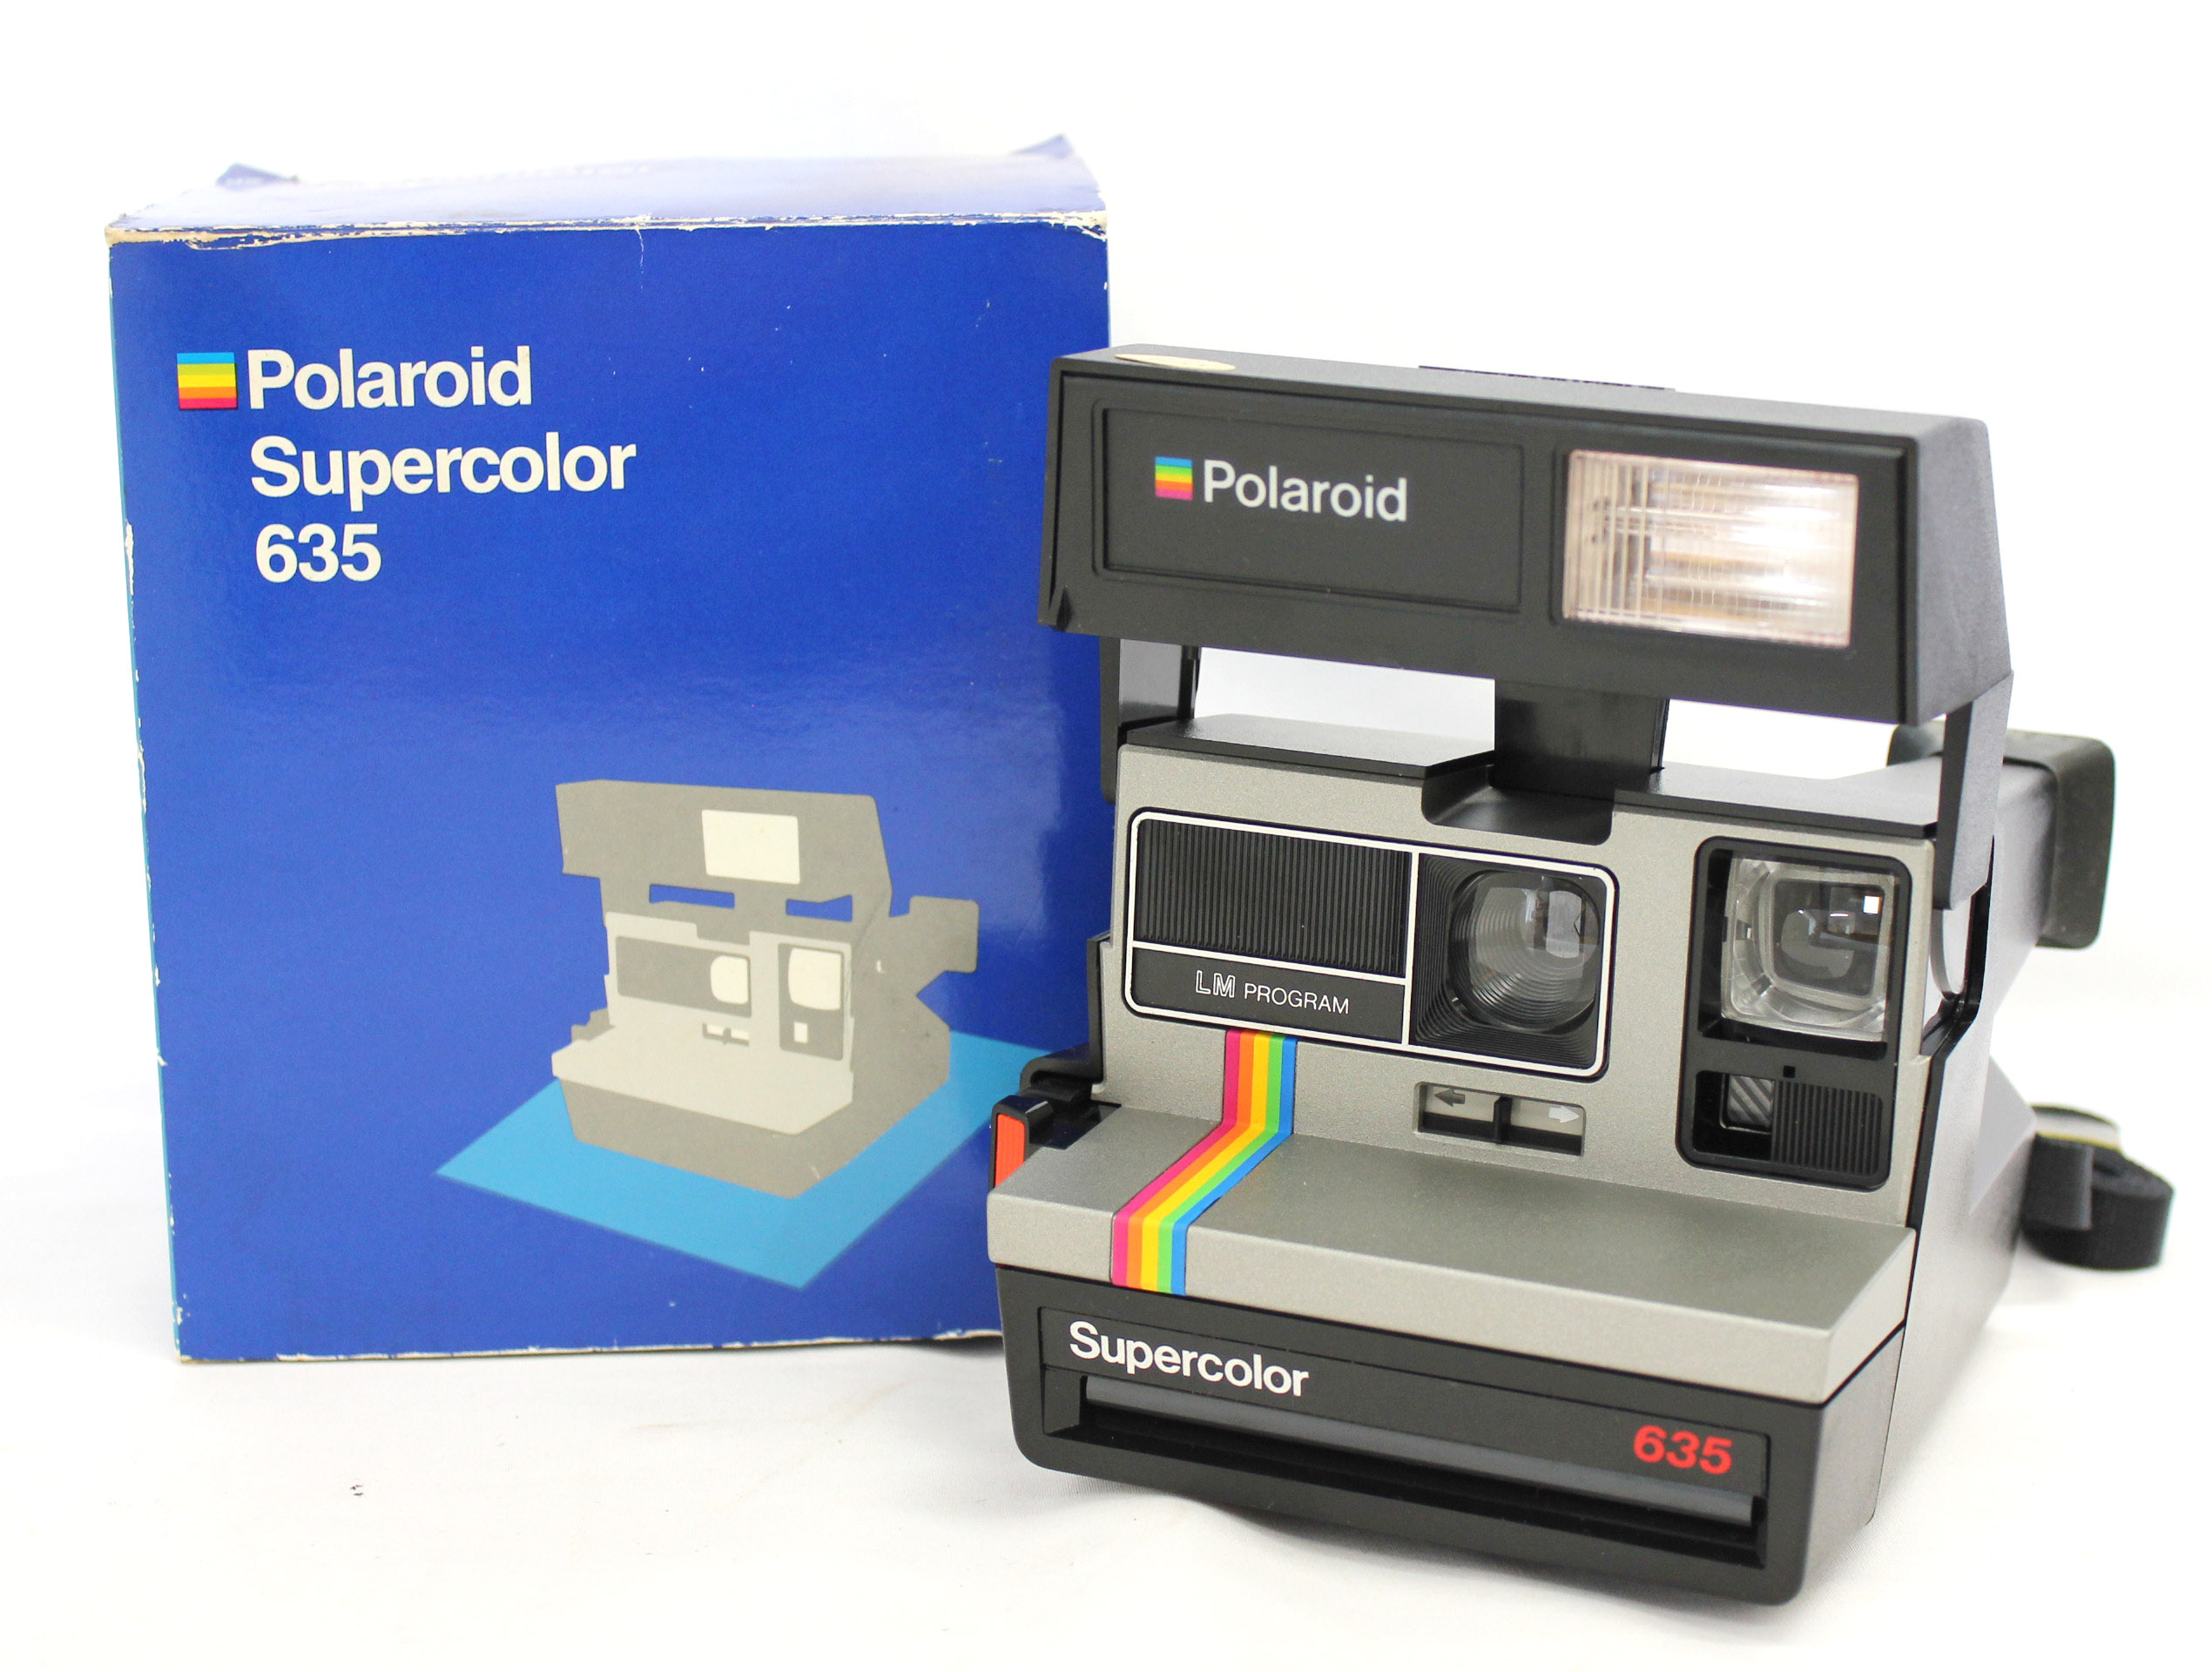 Japan Used Camera Shop | Polaroid Supercolor 635 LM Program (Tested) from Japan